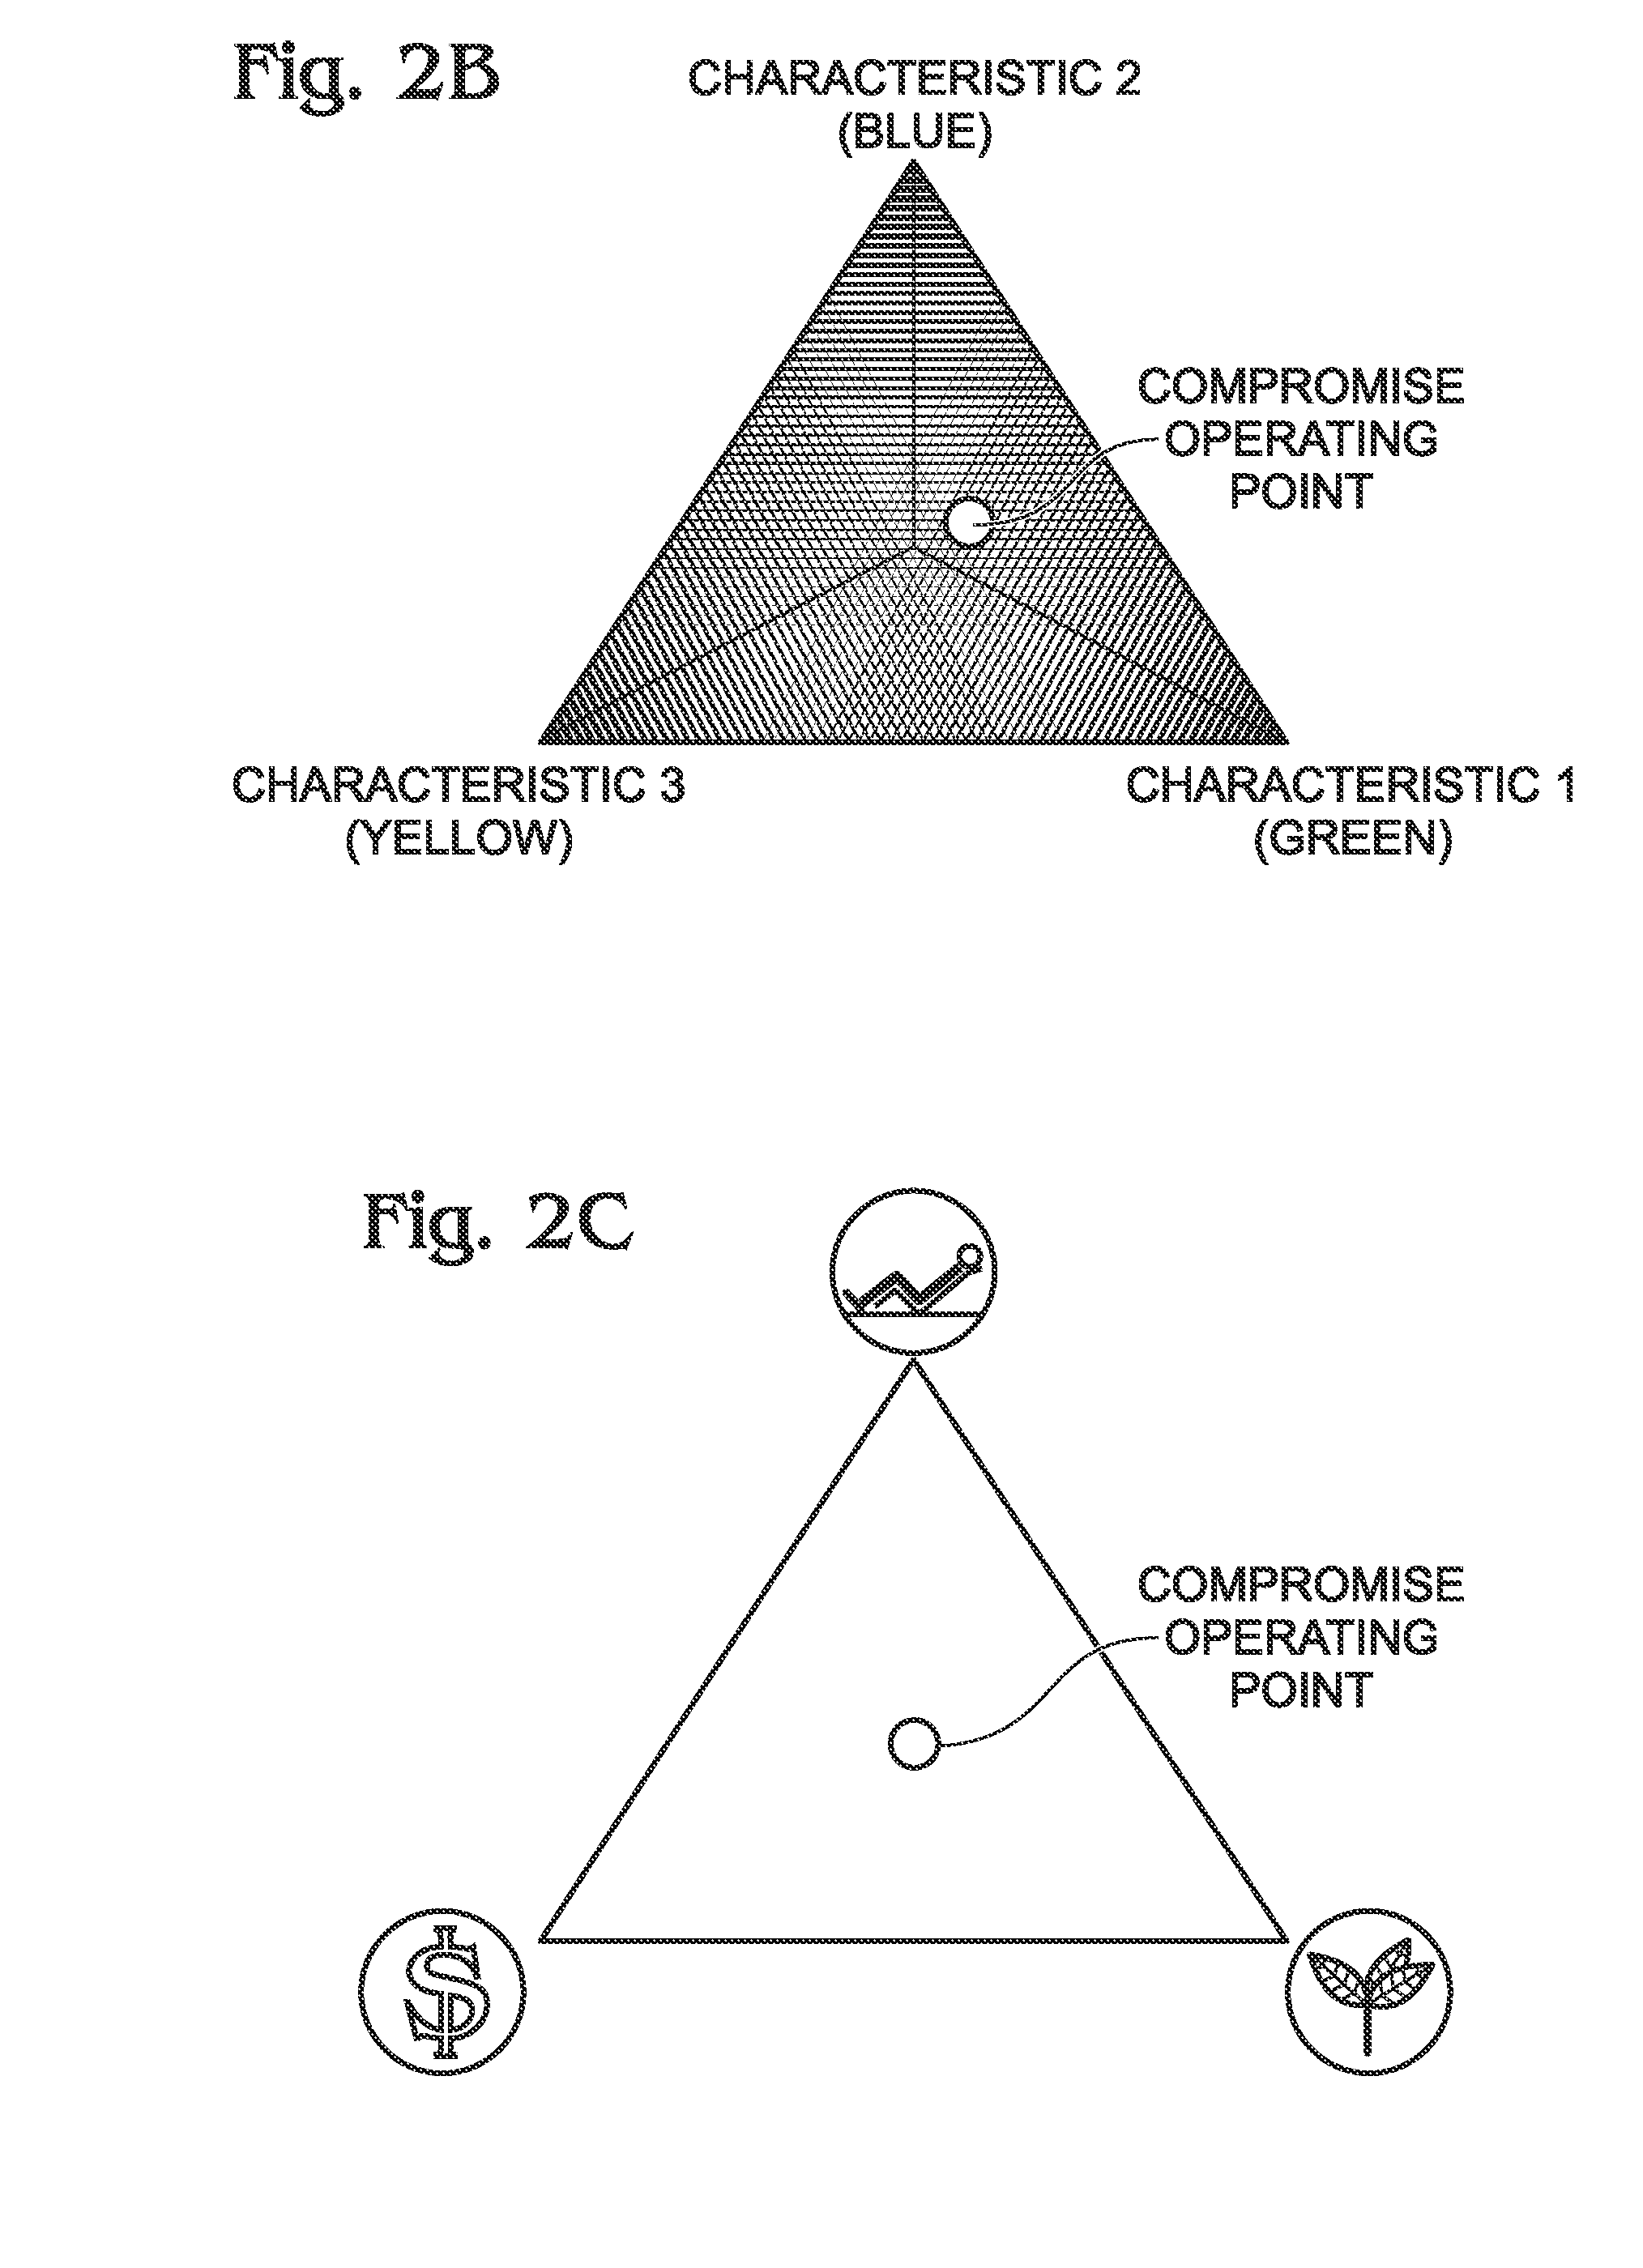 System and method for the multi-dimensional representation of energy control